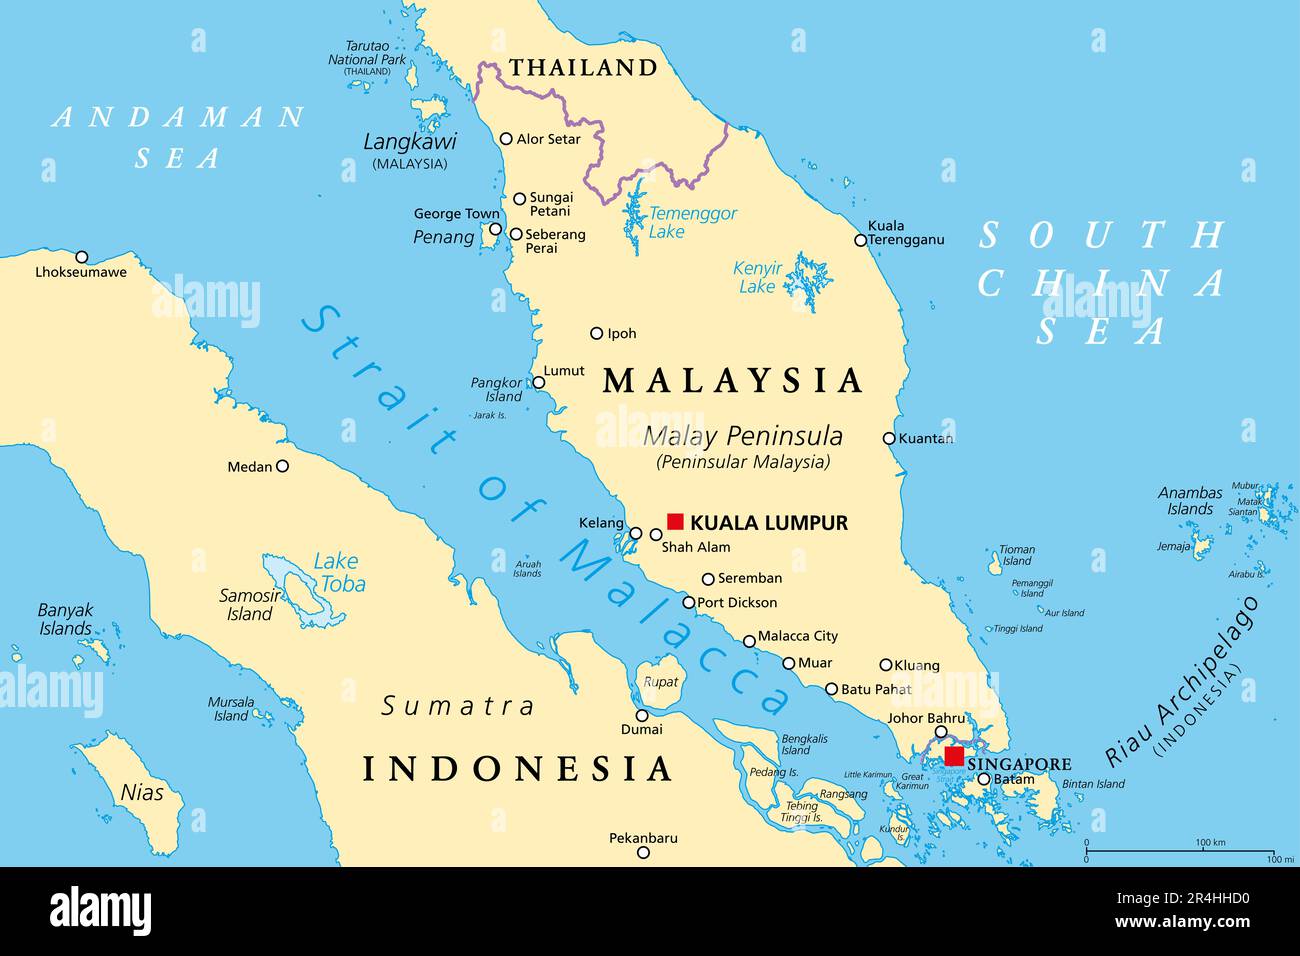 Strait of Malacca, political map. Important shipping lane and main shipping channel between Malay Peninsula (Malaysia) and Sumatra (Indonesia). Stock Photo